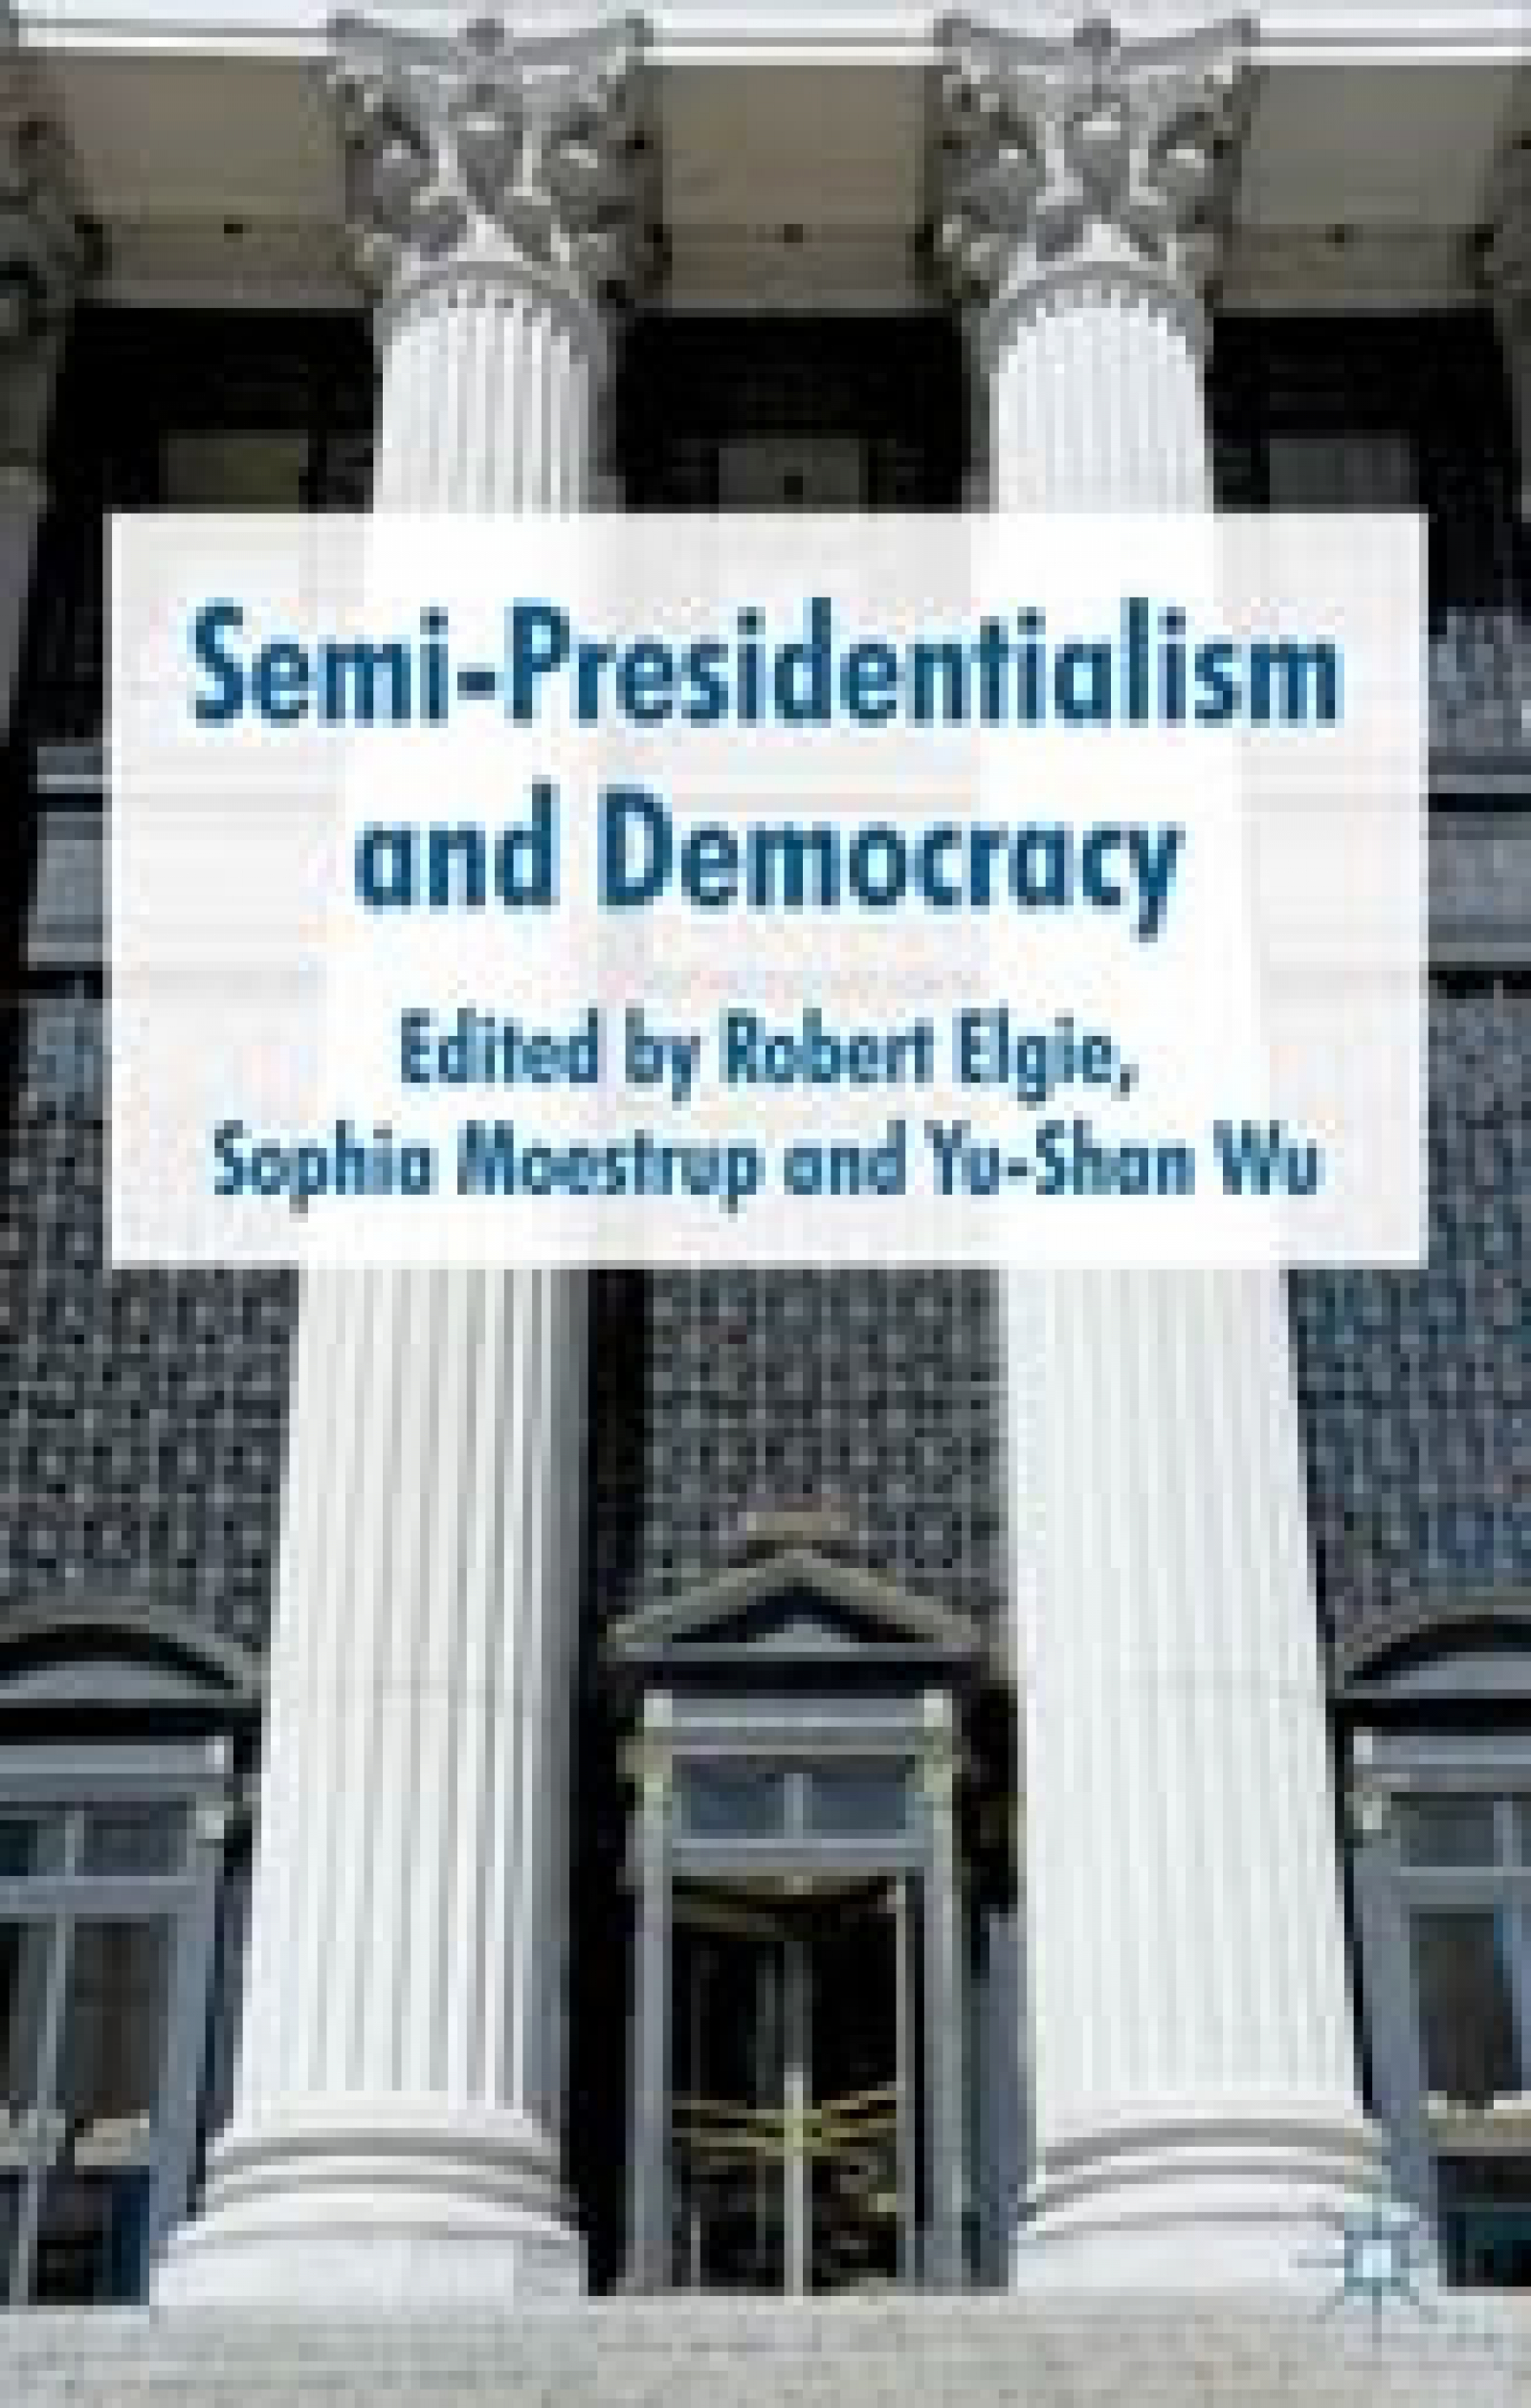 New Collection of Essays Examines "Semi-Presidentialism and Democracy"